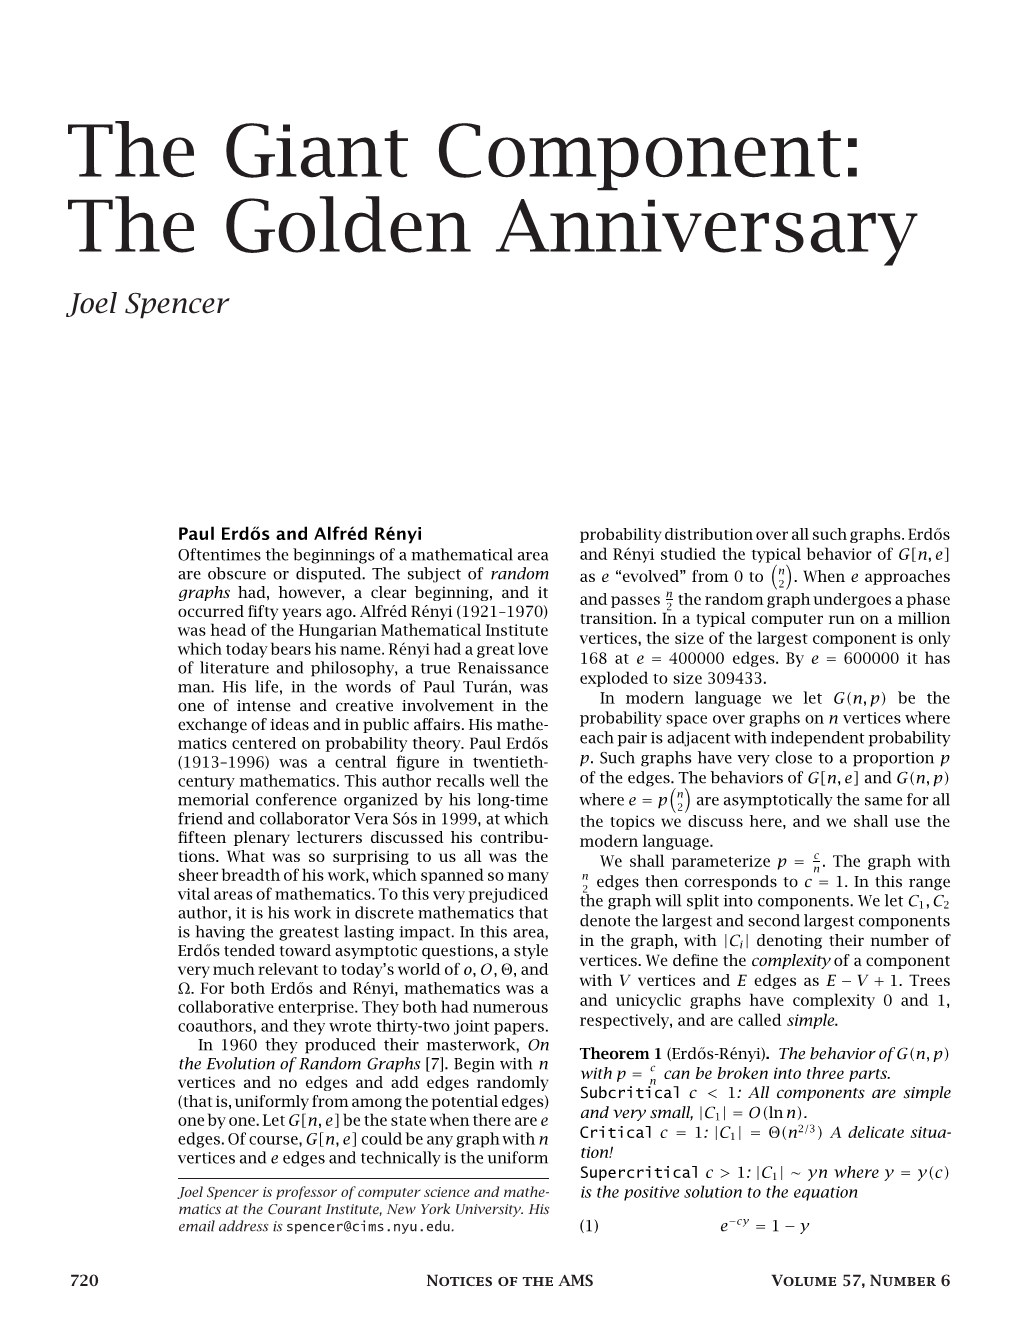 The Giant Component: the Golden Anniversary Joel Spencer